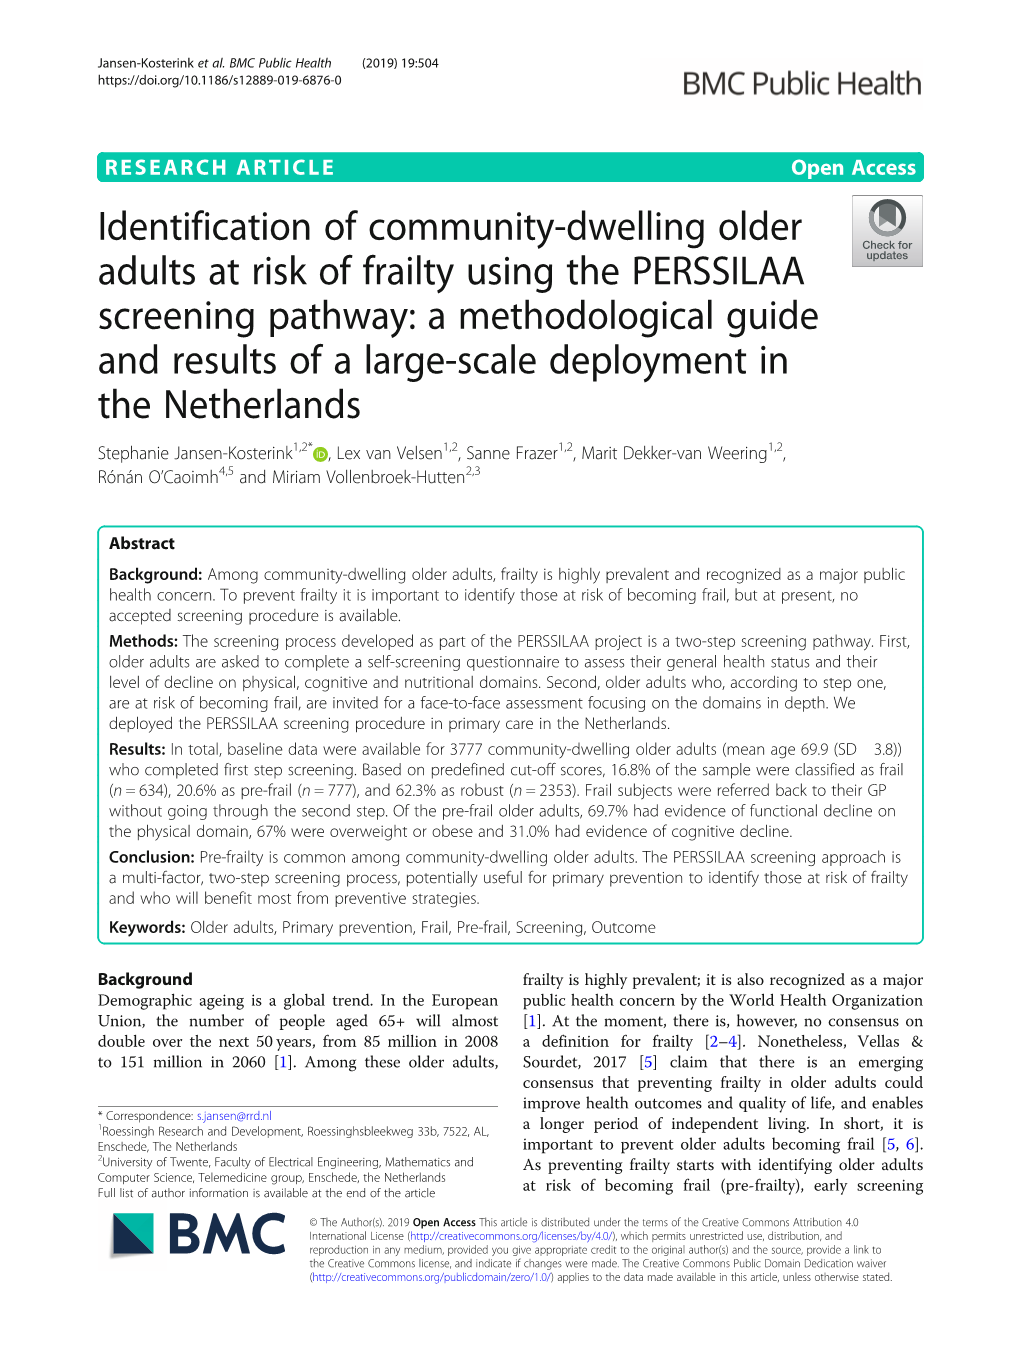 Identification of Community-Dwelling Older Adults at Risk of Frailty Using